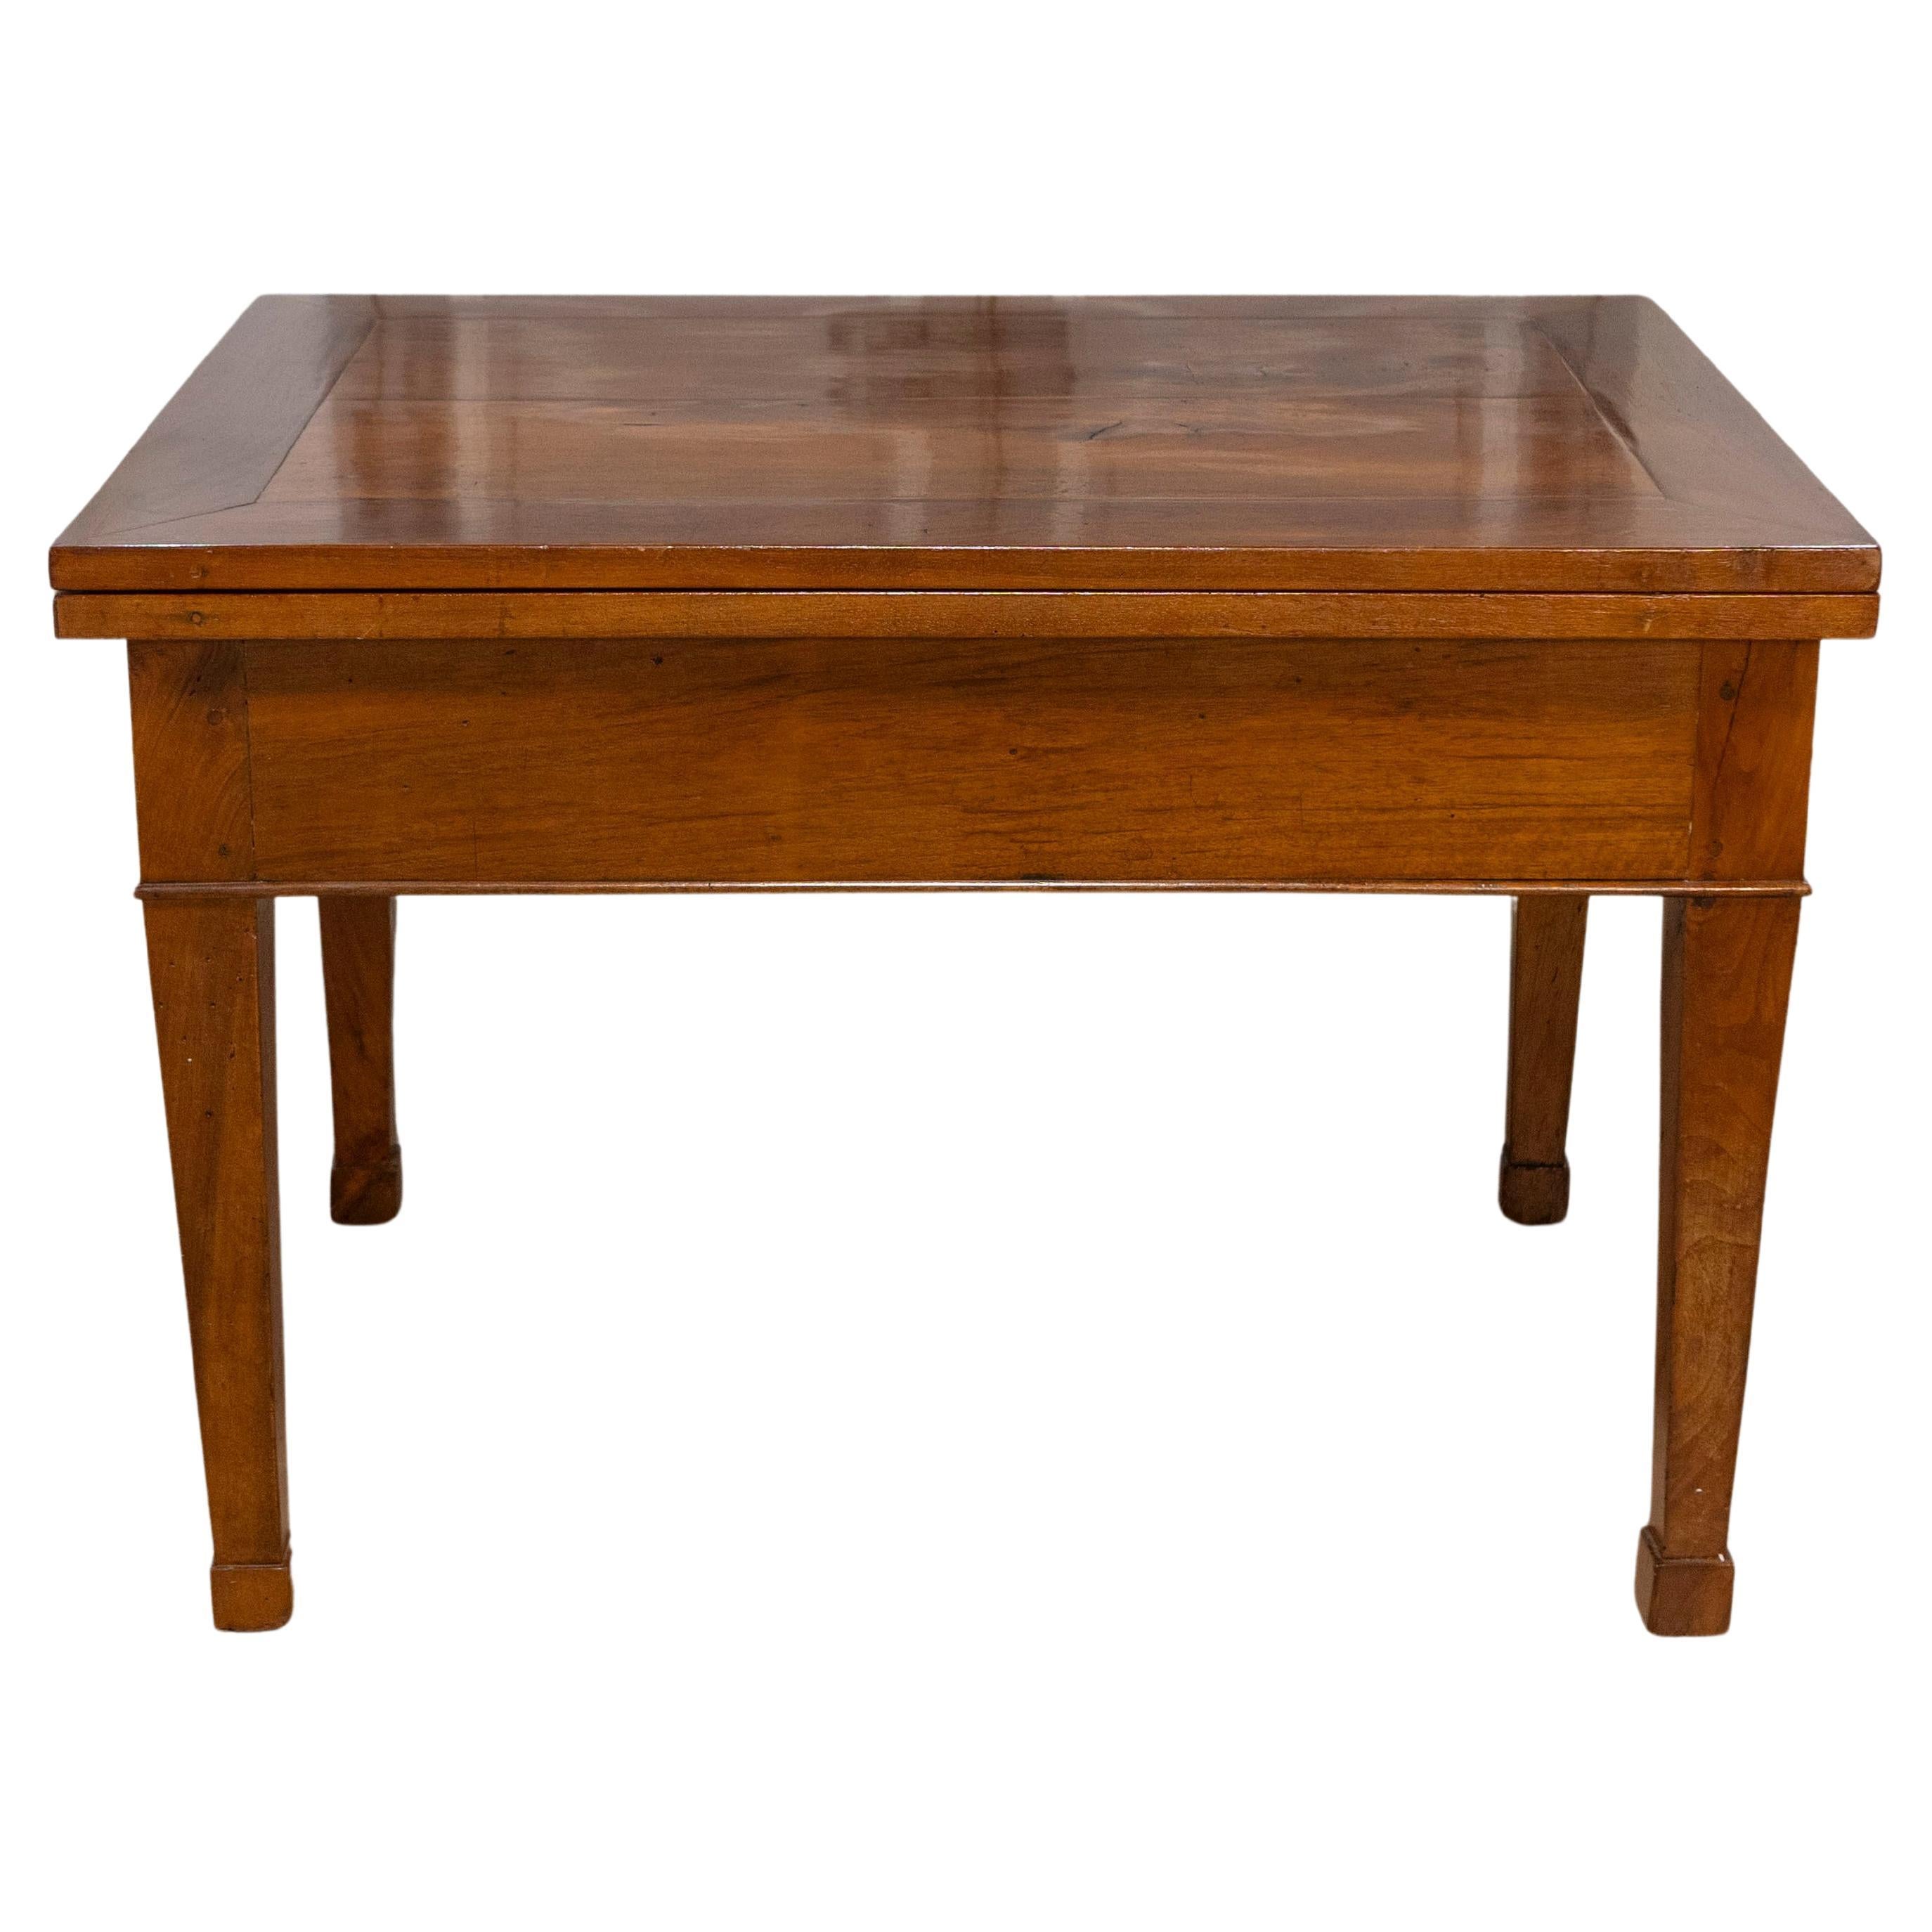 Italian Early 19th Century Walnut Folding Table with Tapered Legs For Sale